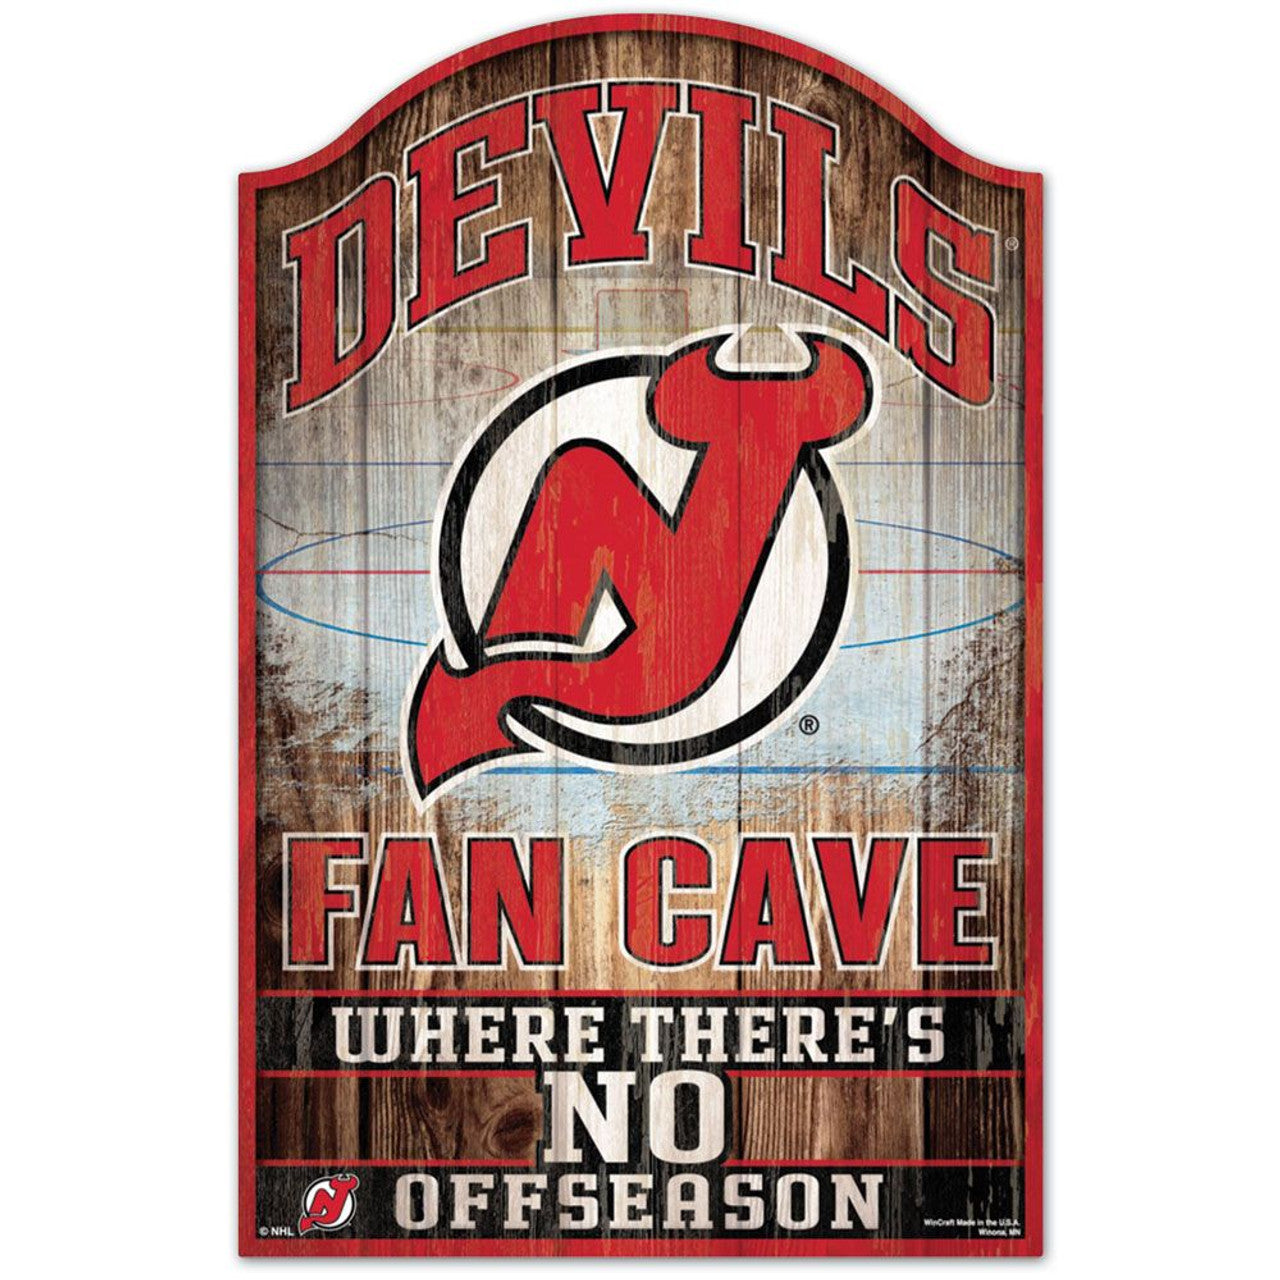 New Jersey Devils 11" x 17" Fan Cave Wood Sign by Wincraft